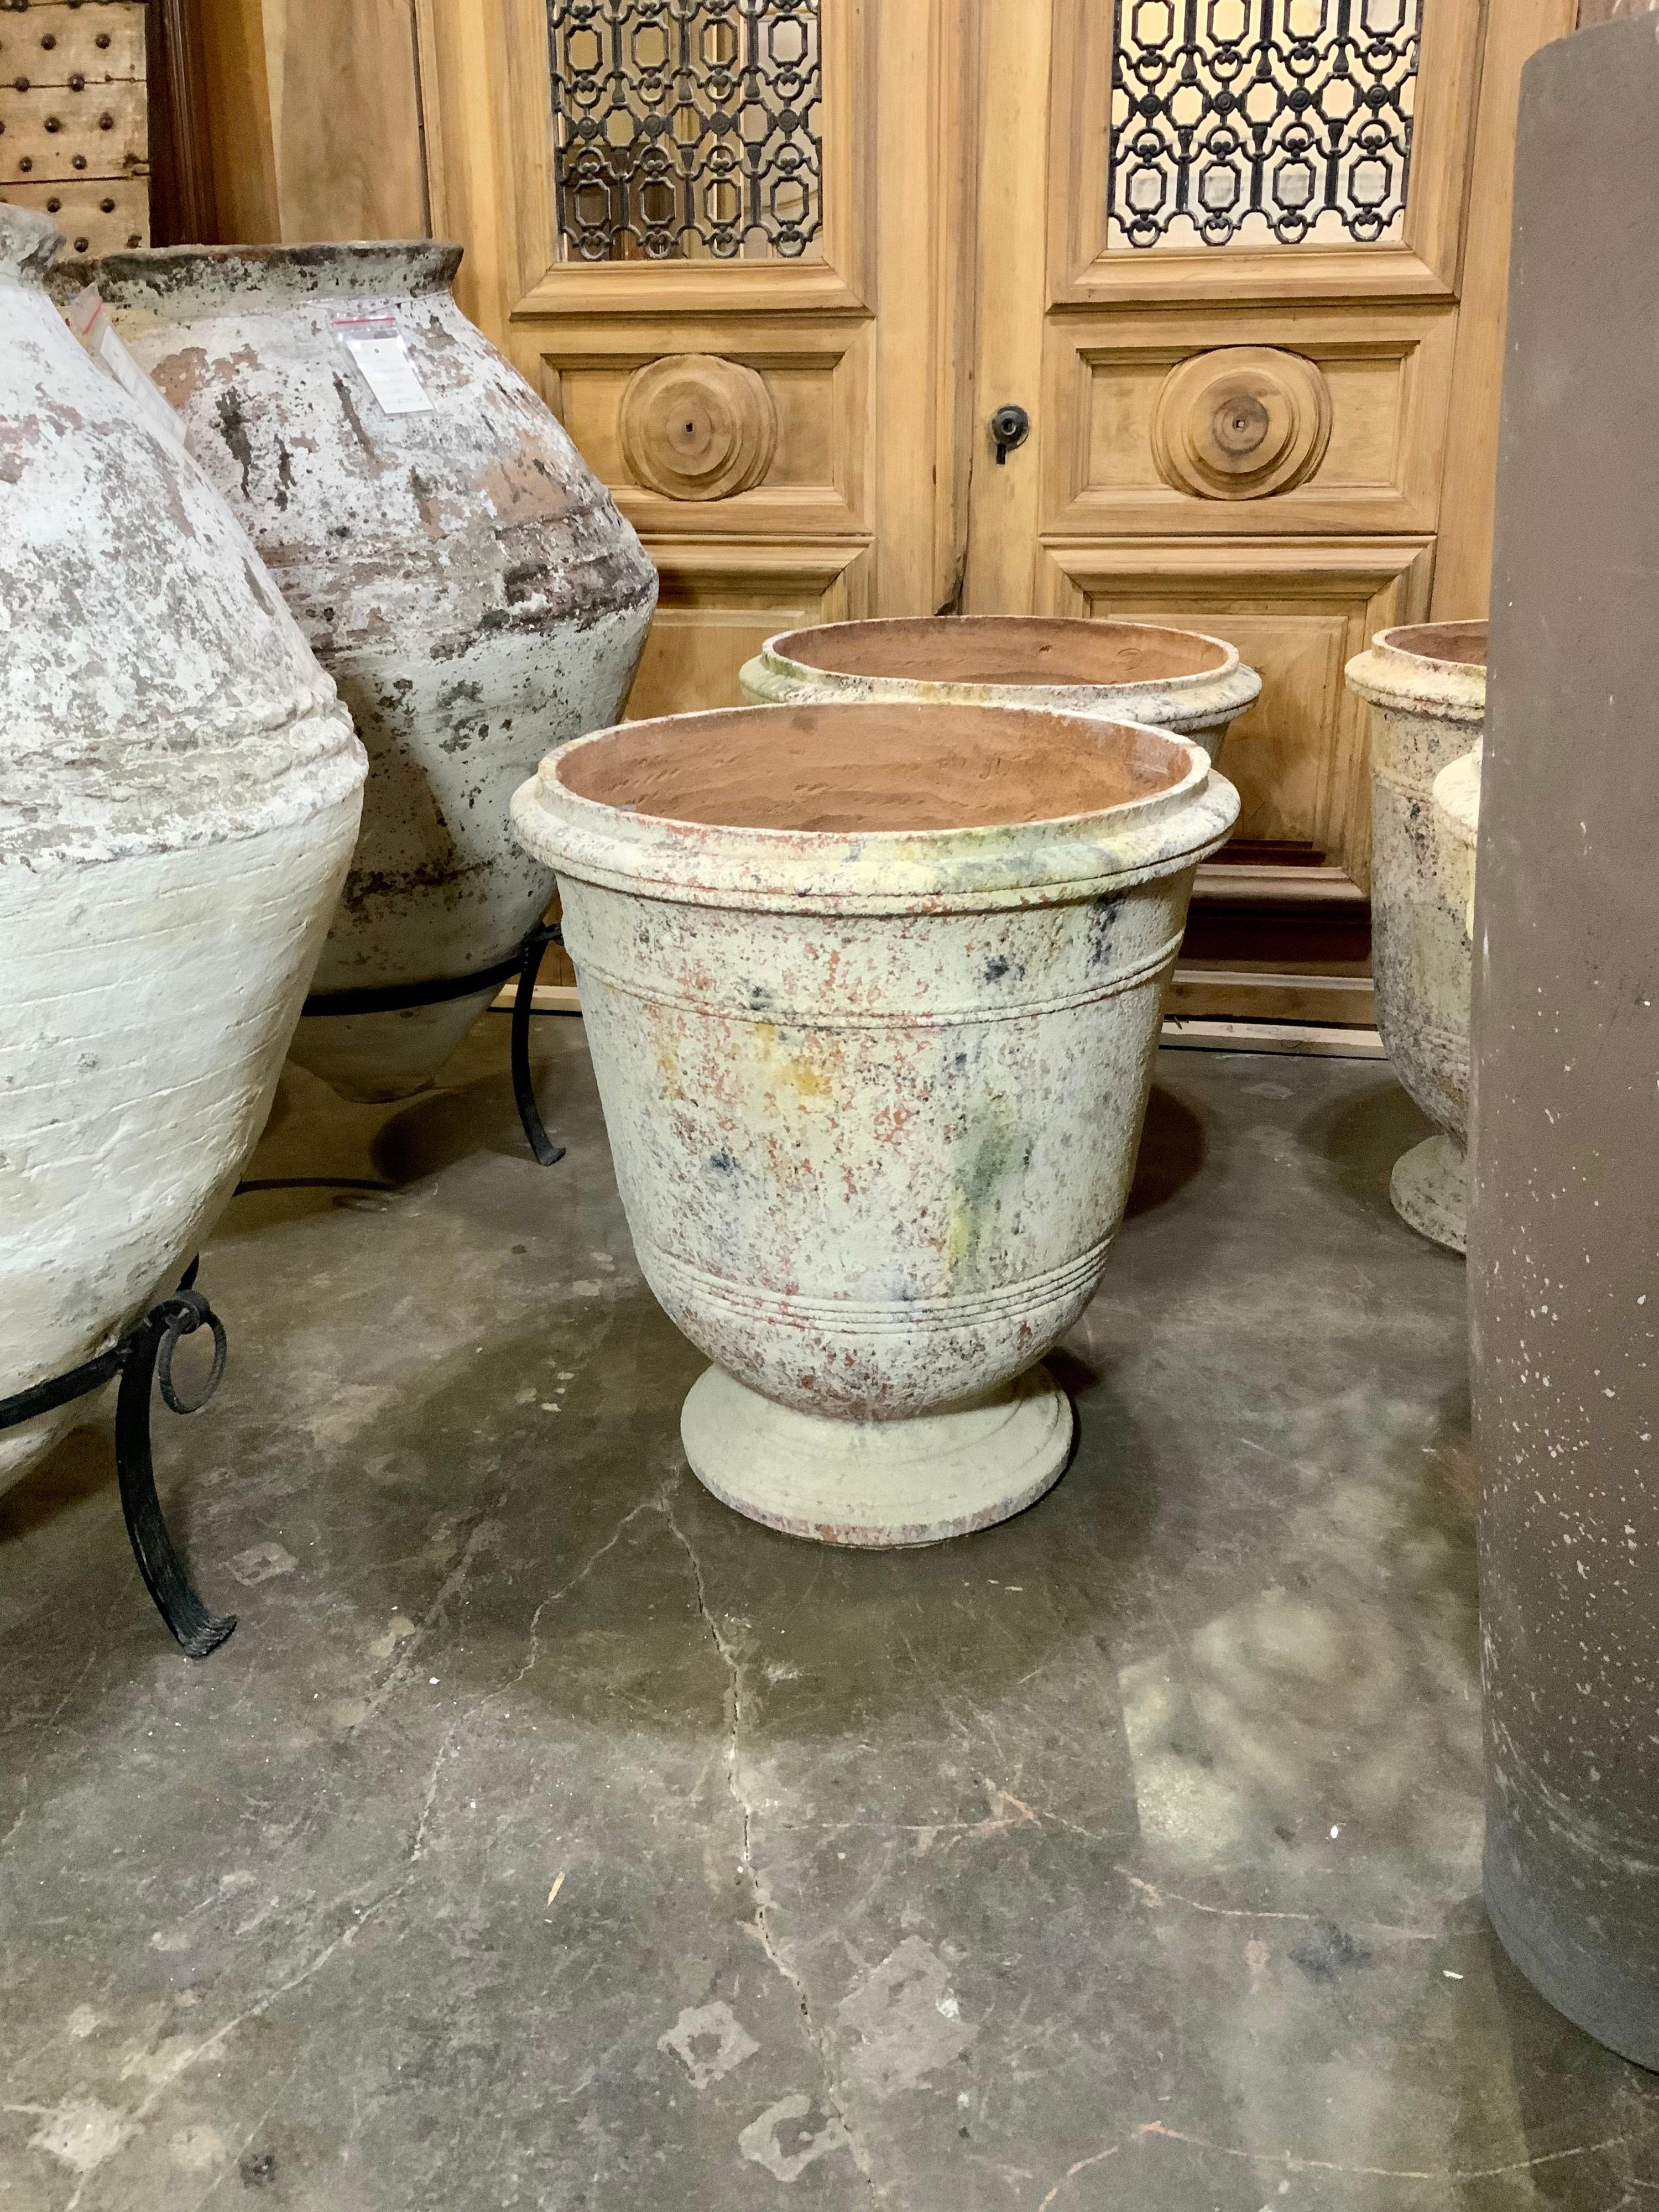 This large terracotta urn origins from Provence, in France.

Contemporary, handmade.